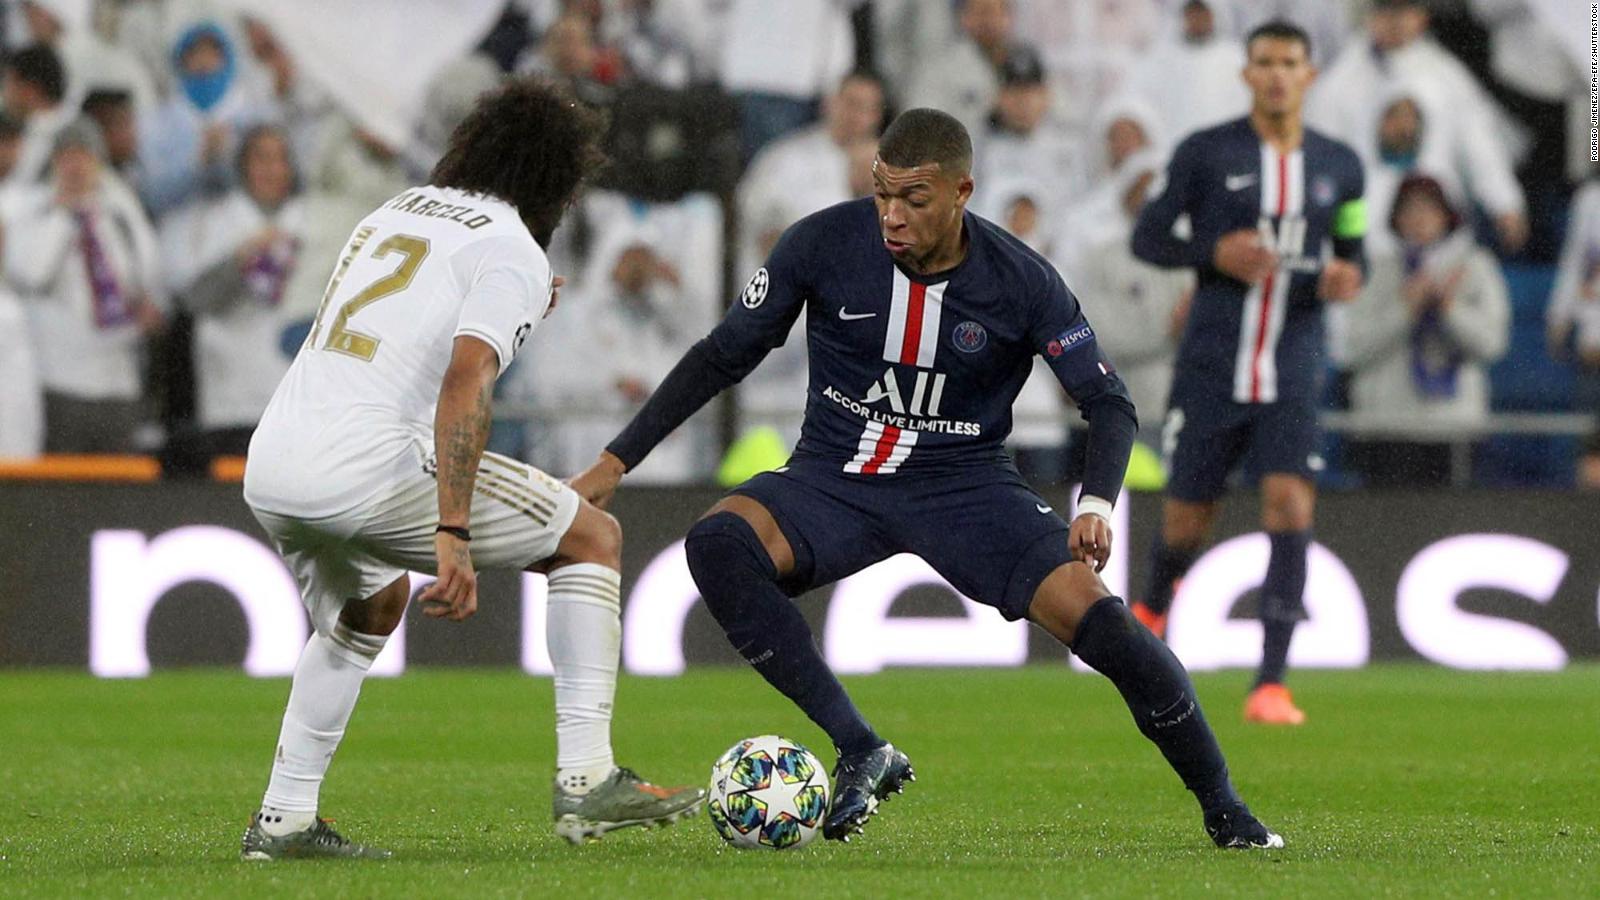 Real Madrid submit $188 million bid for PSG star Kylian Mbappé